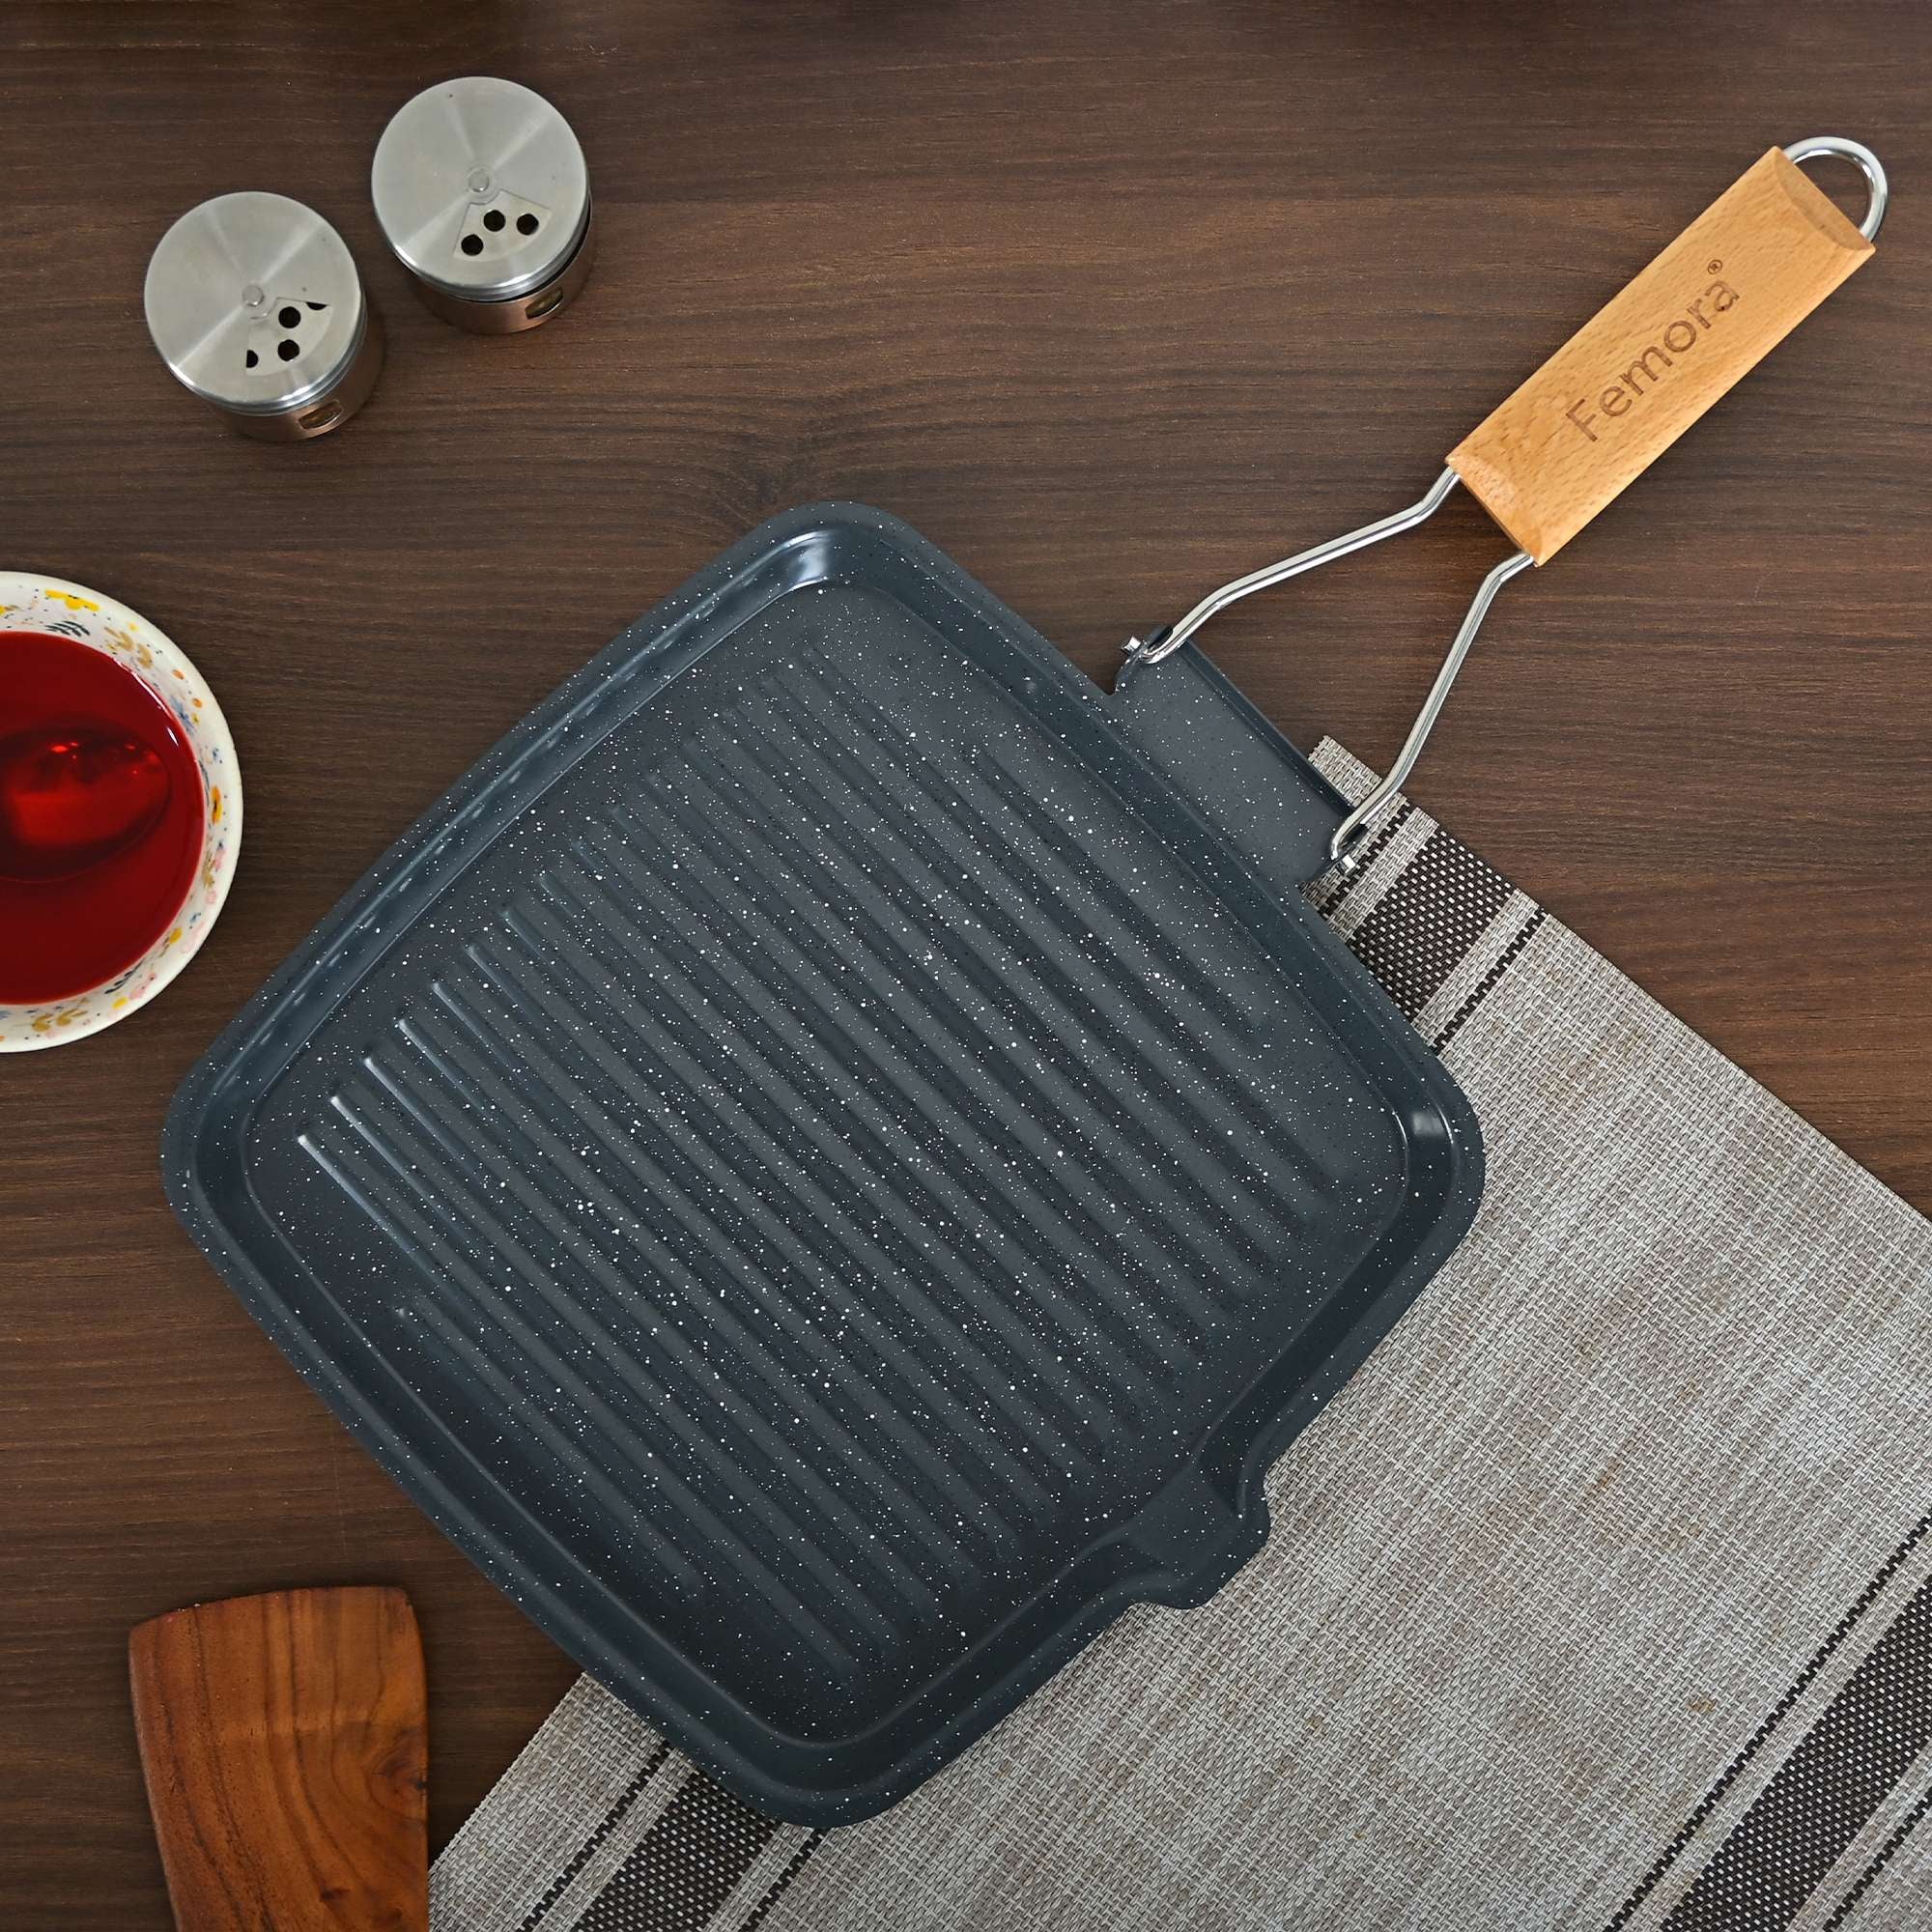 Femora Carbon Steel Non-Stick Square Grillpan with Folding Wooden Handle, 3 Layer Non-Stick Coating Pan, Black, Pack of 1, 24 CM x 24 CM